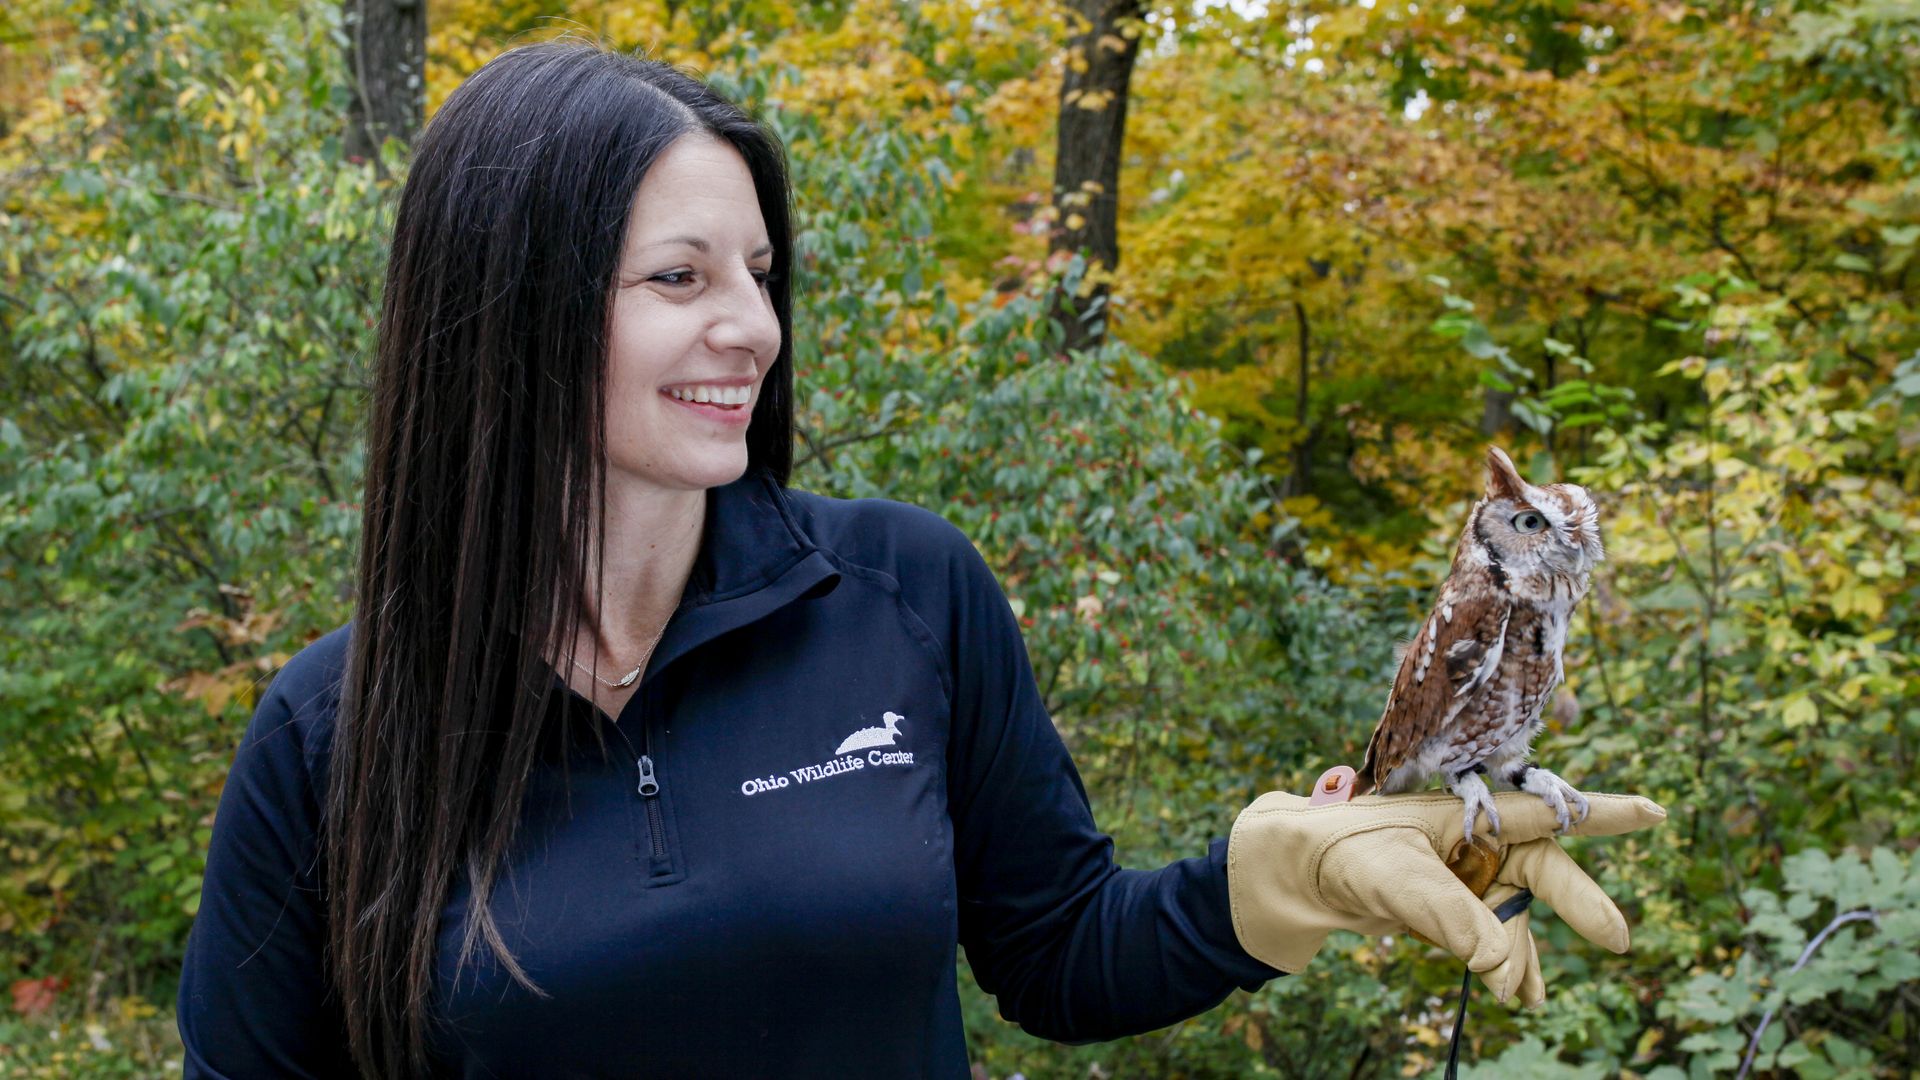 Ohio Wildlife Center executive director Lolita Haverlock holds a small owl on her finger in a nature setting. 